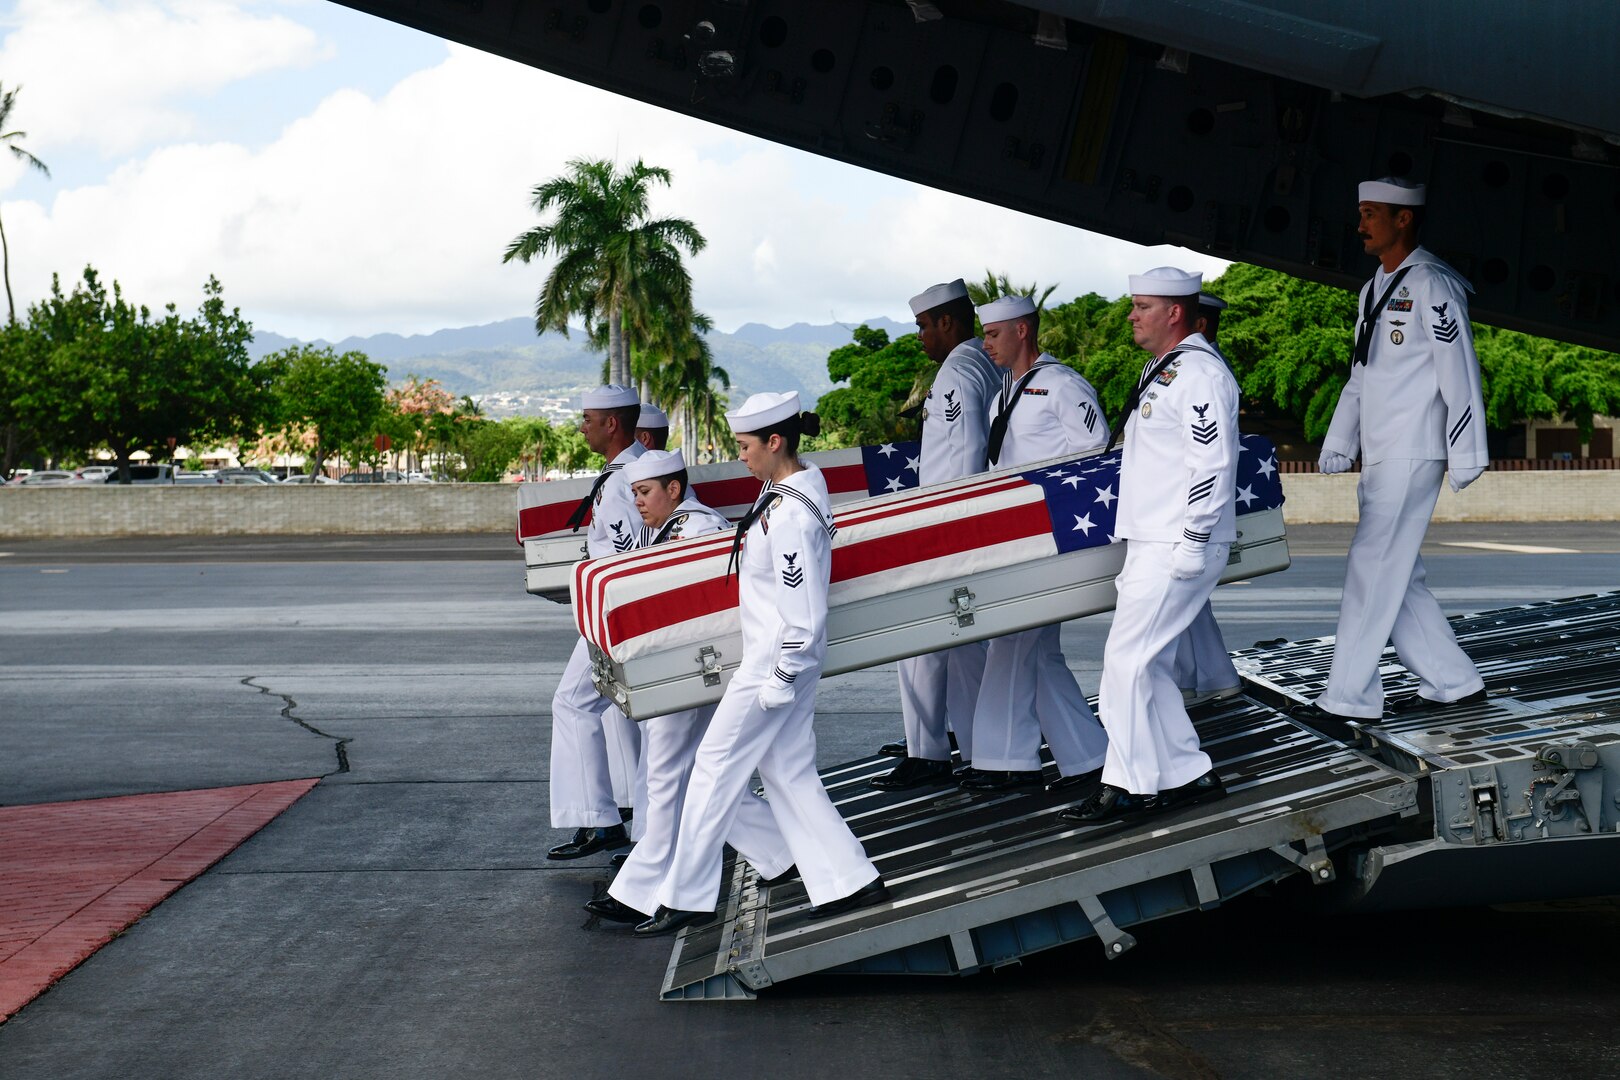 Sailors carry two flag-draped caskets down the cargo ramp of an airplane.